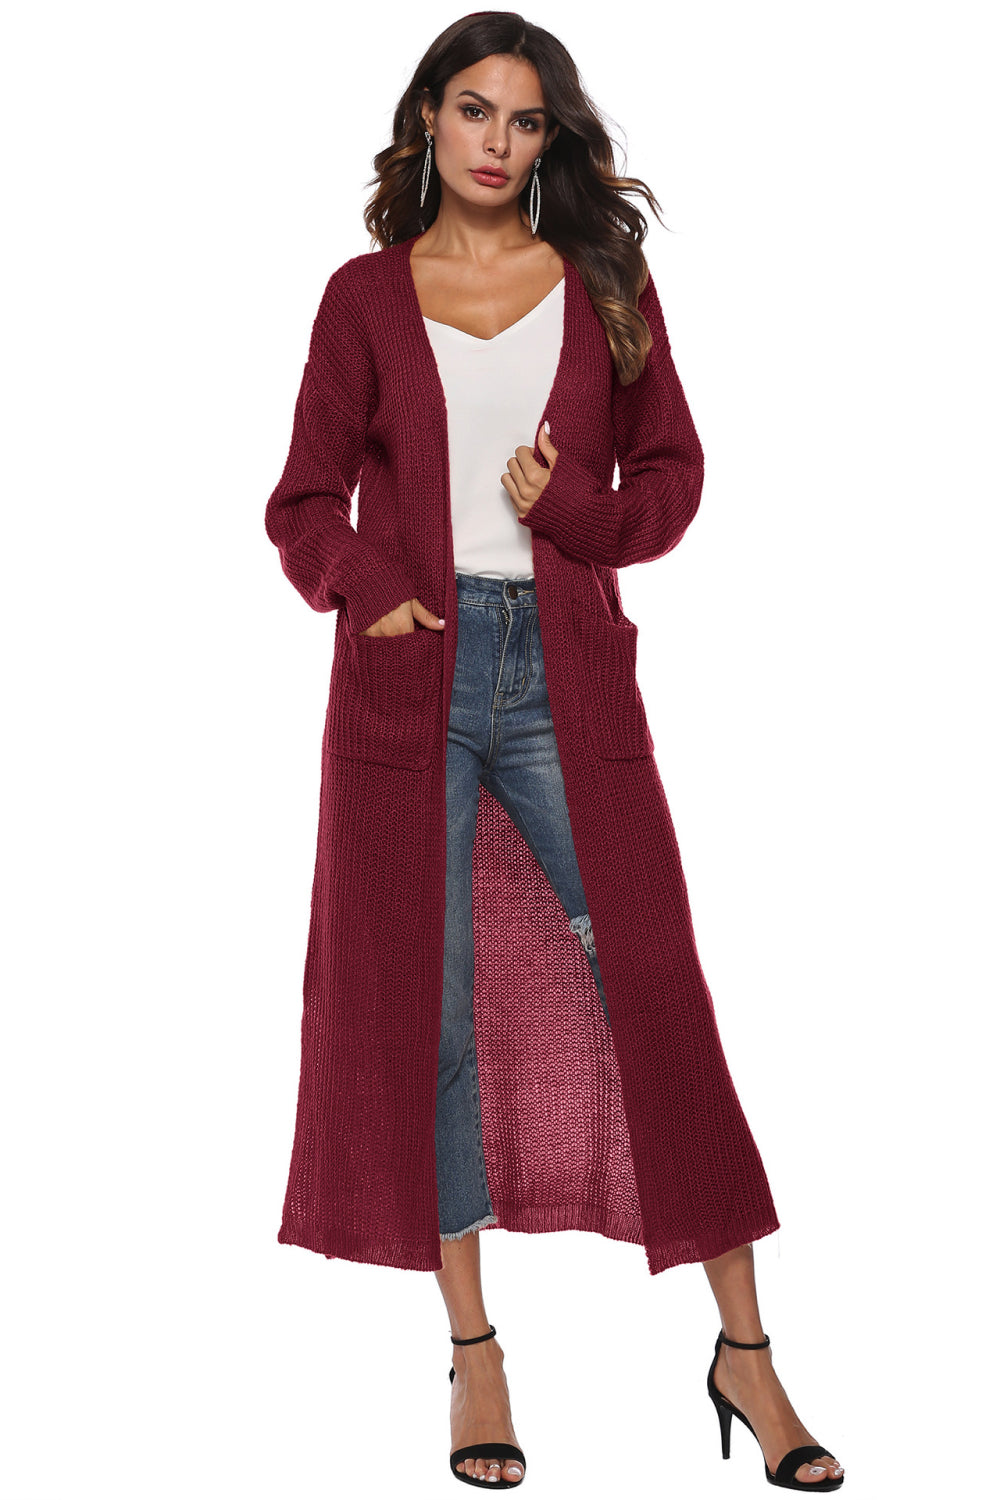 Long Sleeve Open Front Buttoned Cardigan - Dark Red / S - Women’s Clothing & Accessories - Shirts & Tops - 25 - 2024